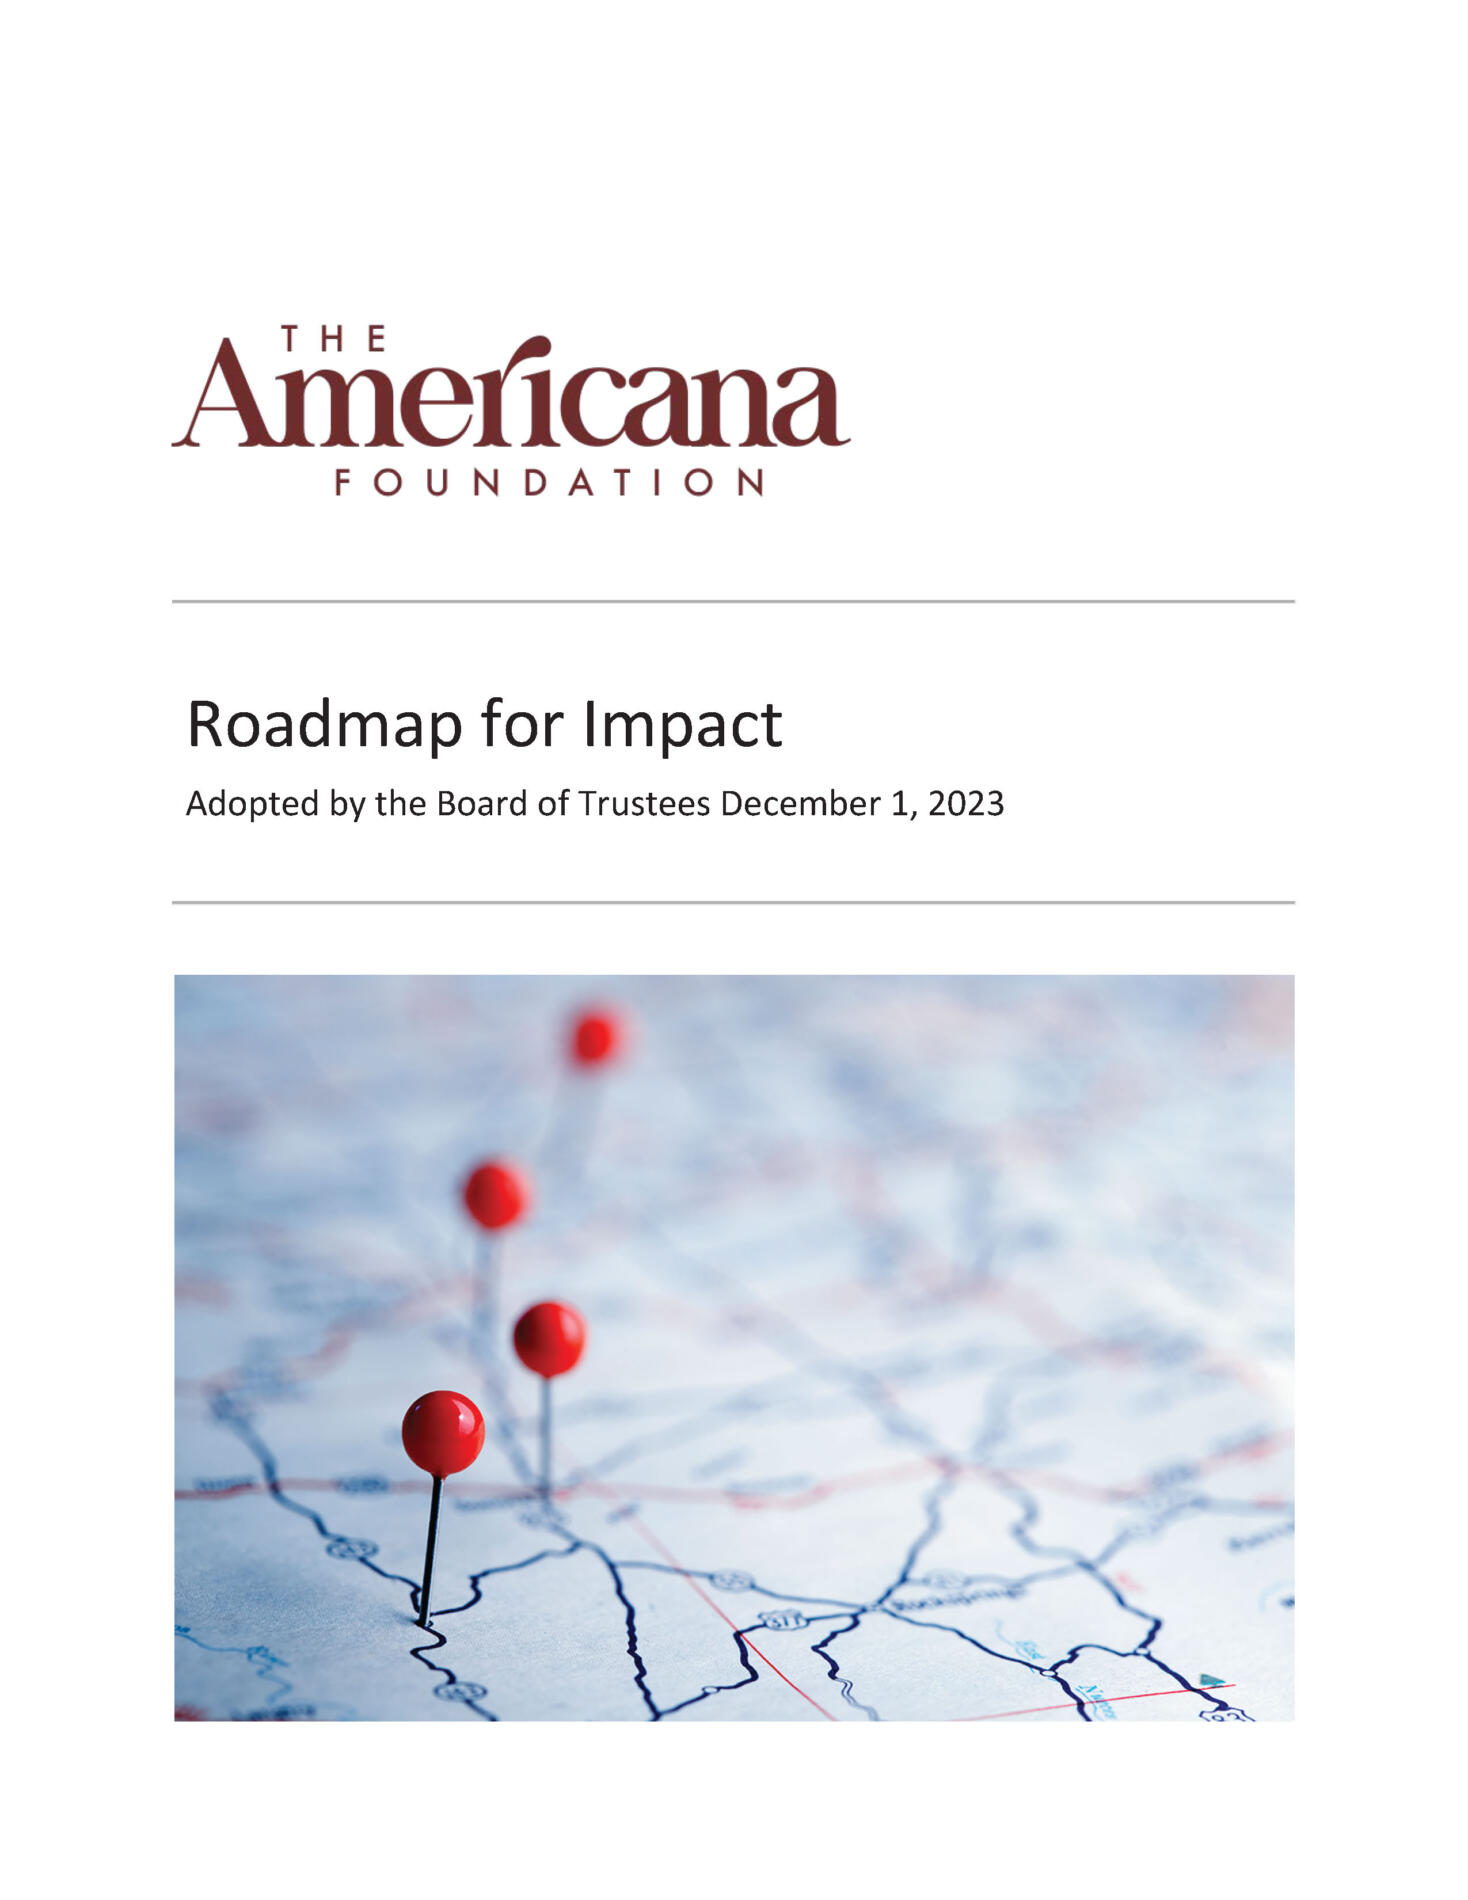 The Americana Foundation Roadmap for Impact